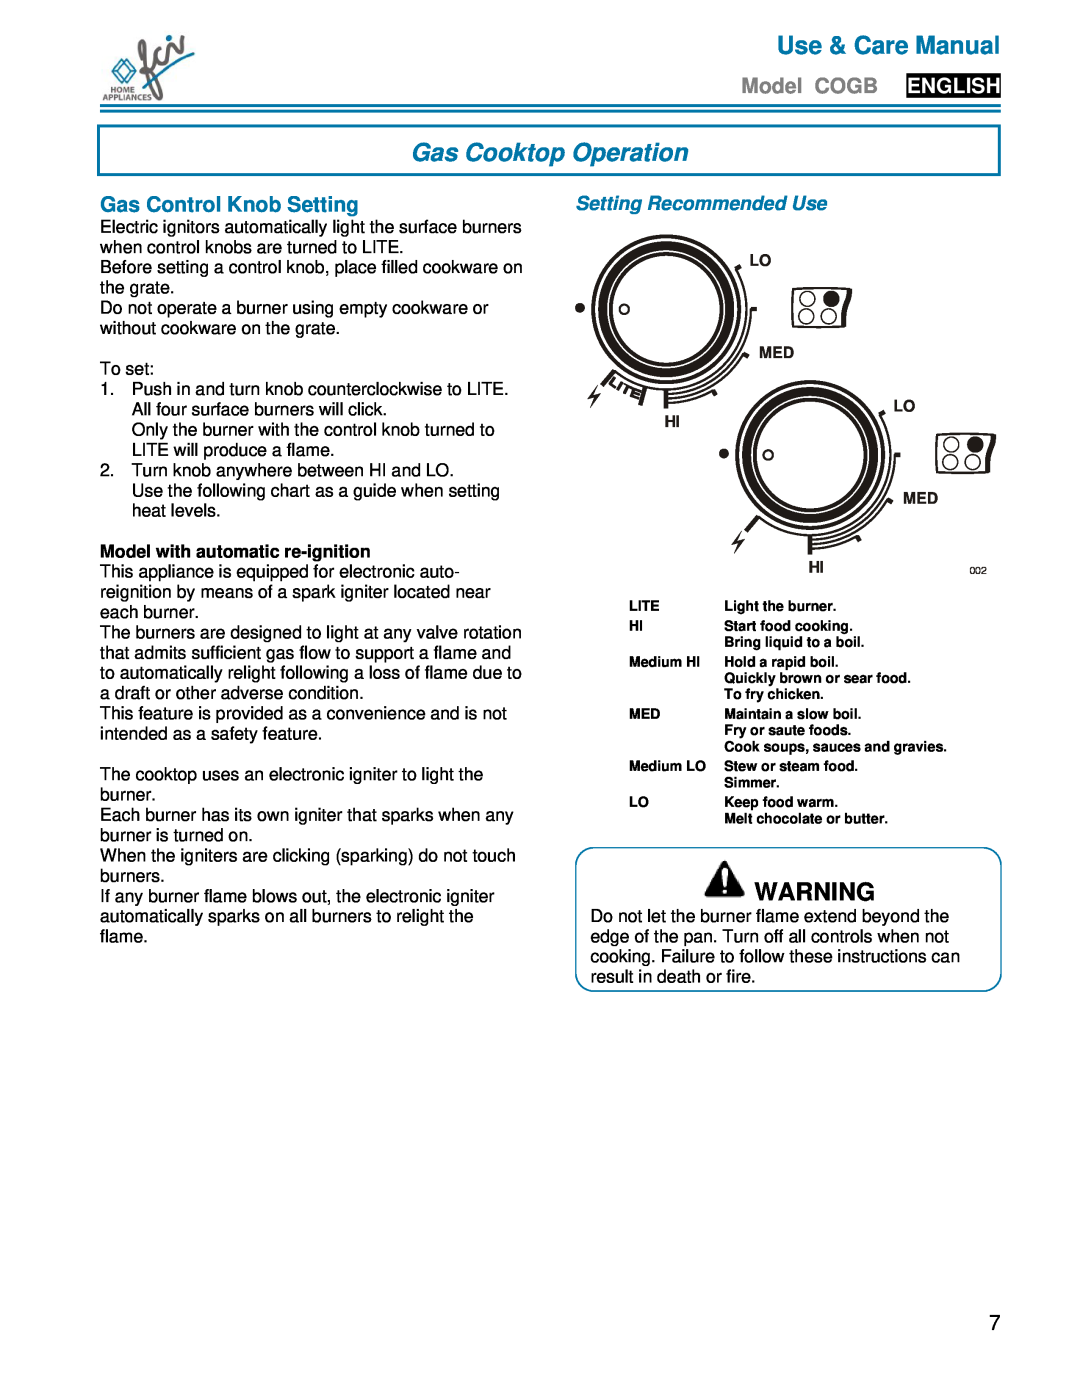 FCI Home Appliances COGB33062 Gas Cooktop Operation, Gas Control Knob Setting, Setting Recommended Use, Use & Care Manual 